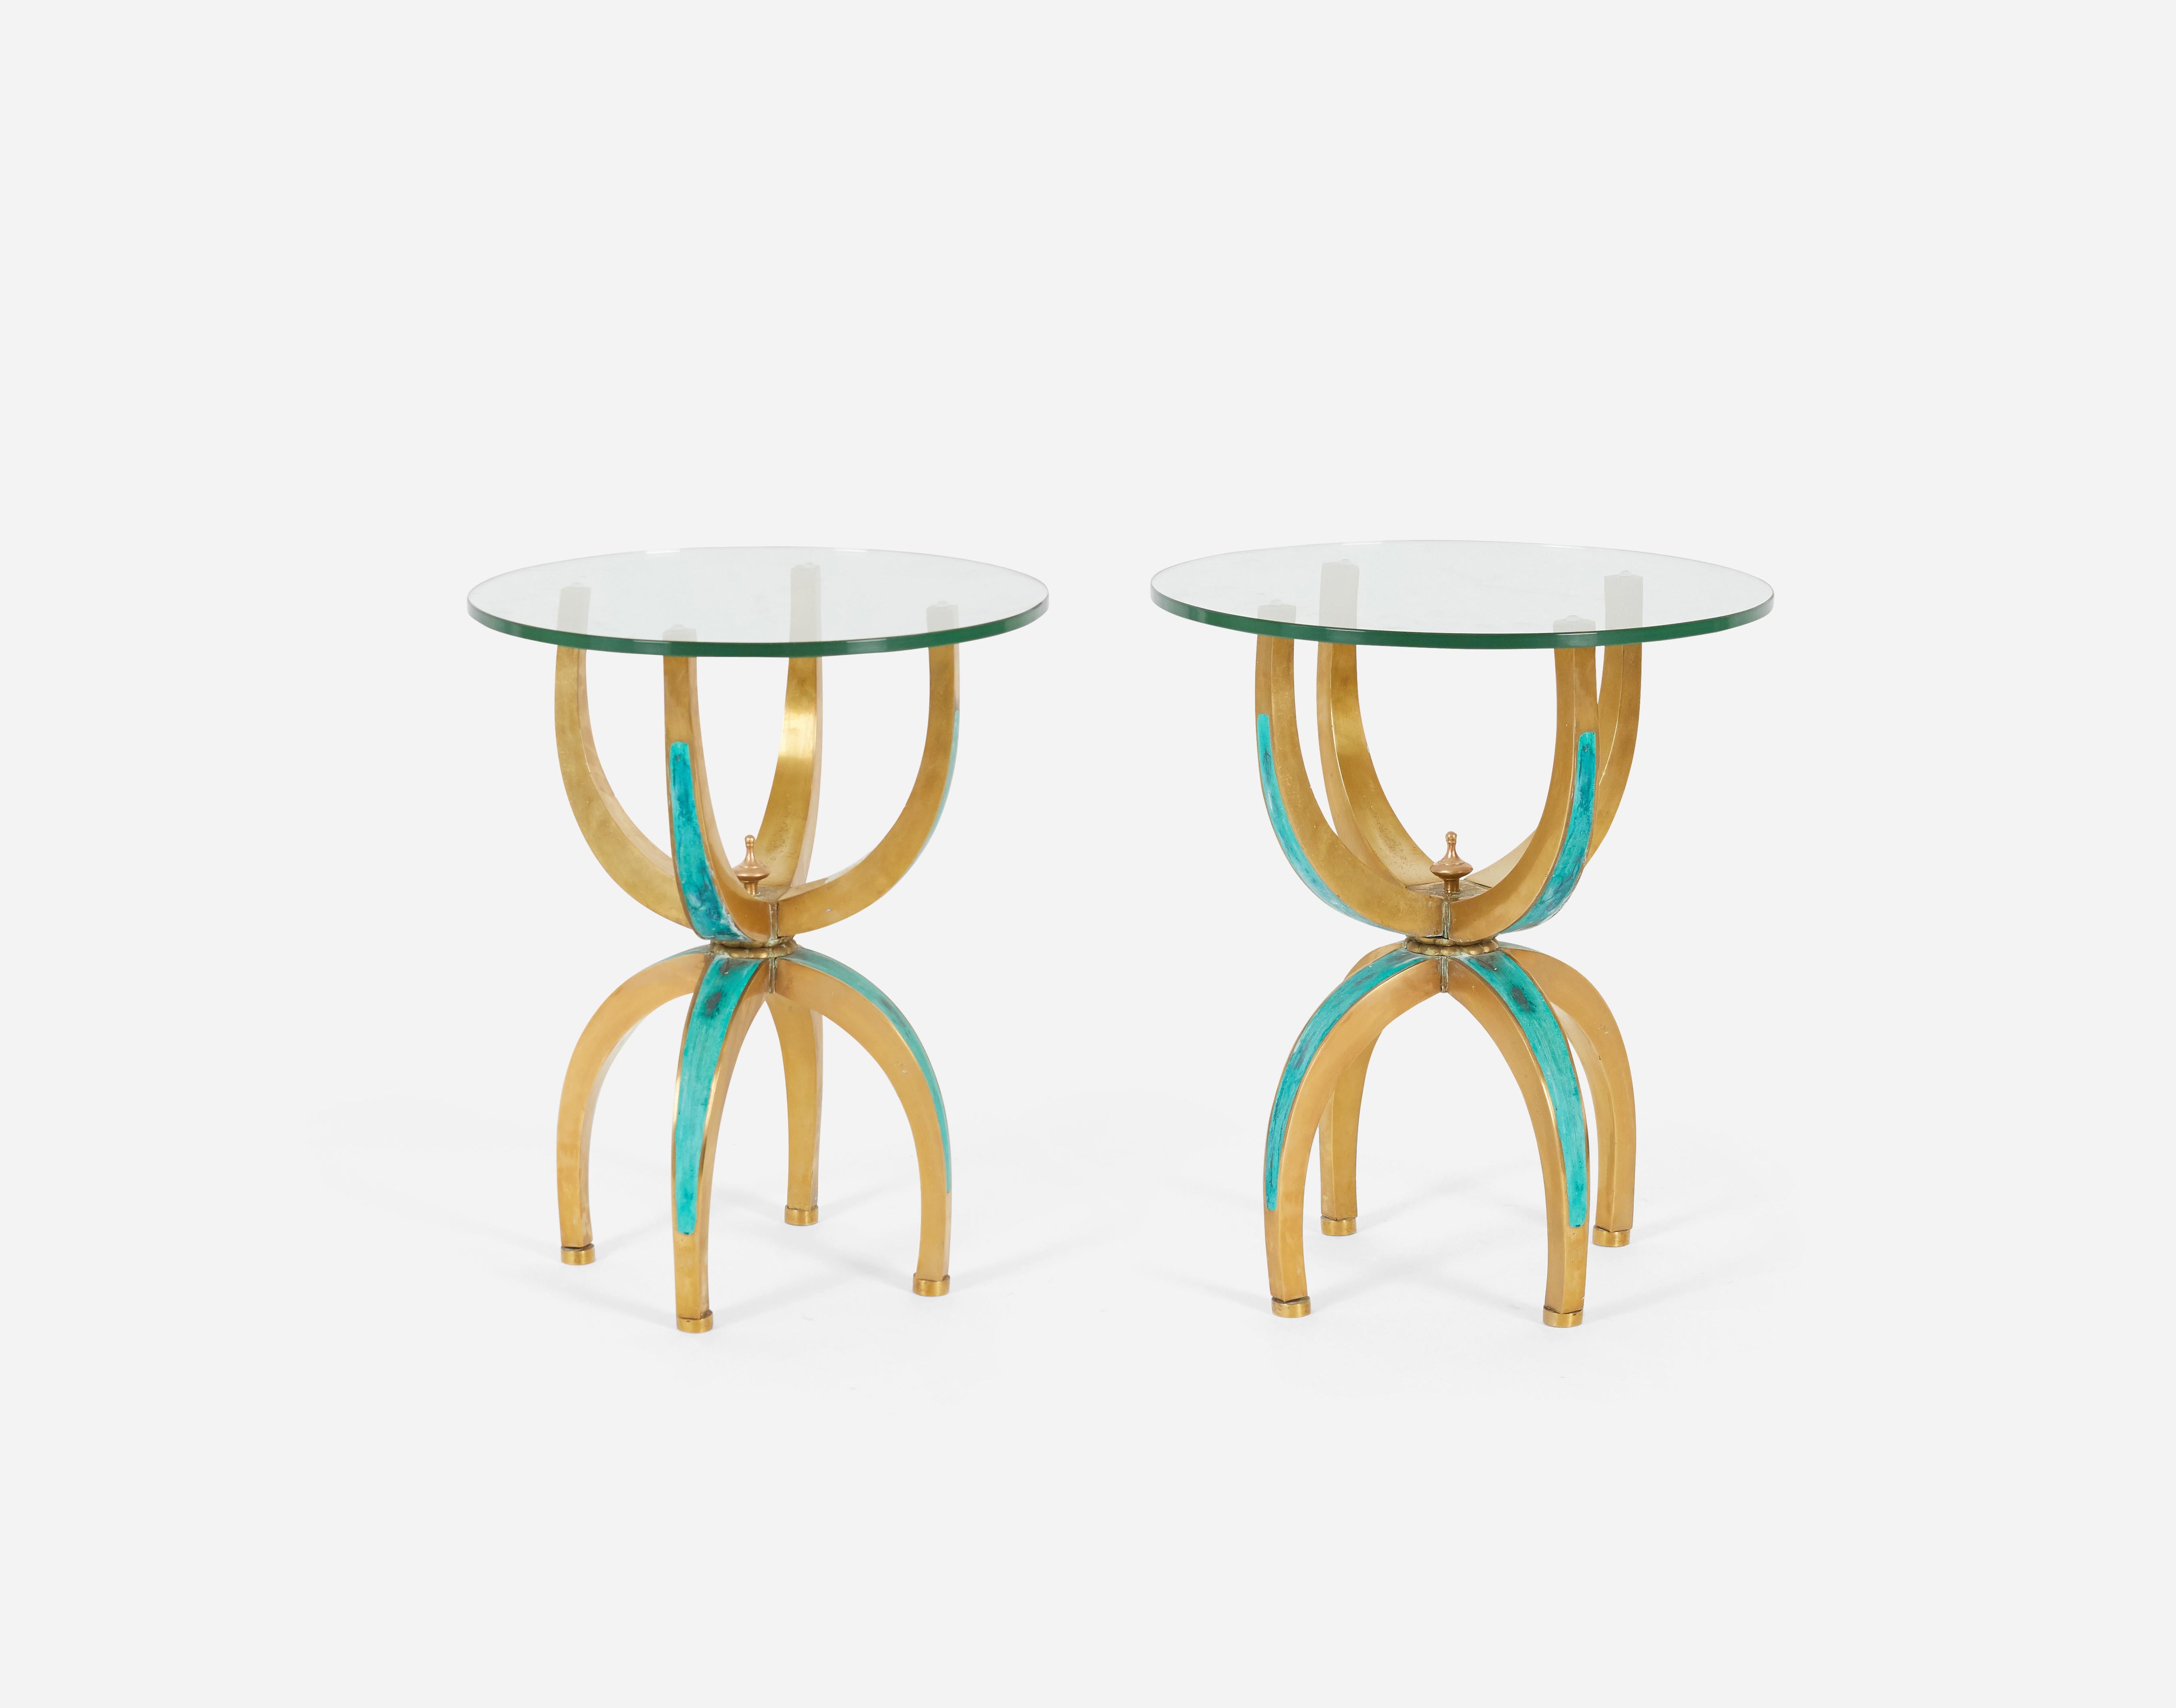 Pair of side tables by Pepe Mendoza. Brass forms with ceramic inlay. New glass tops.